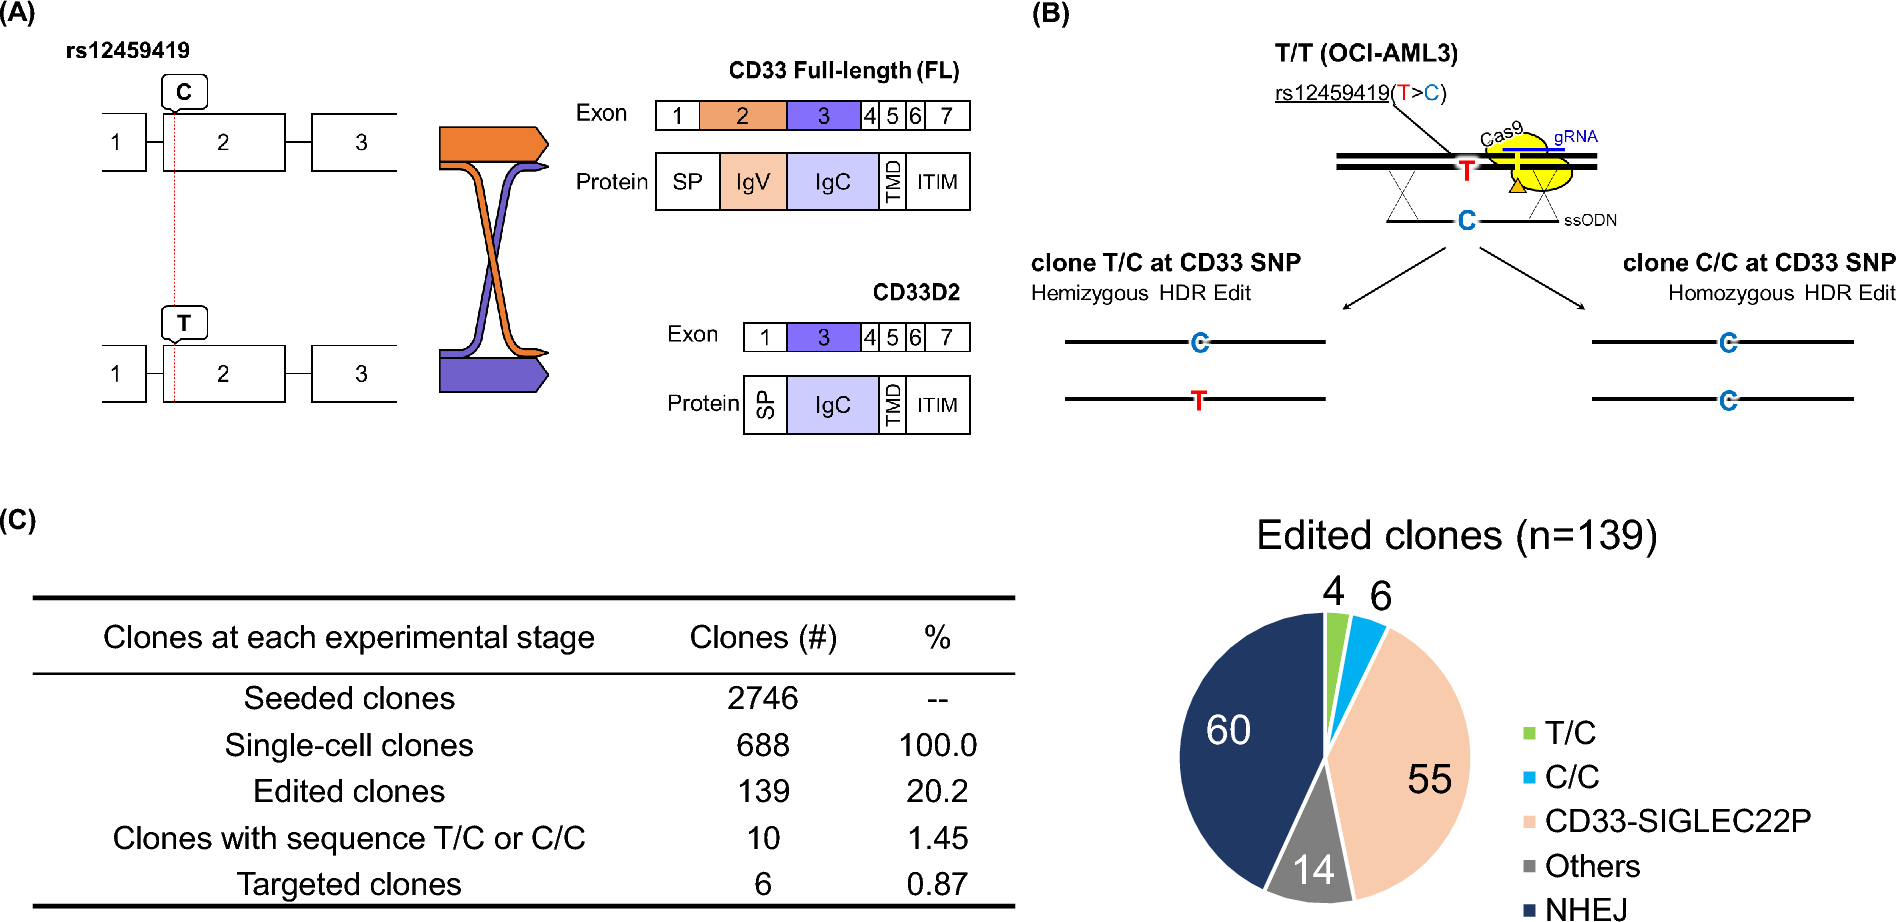 CRISPR/Cas9 gene editing clarifies the role of CD33 SNP rs12459419 in gemtuzumab ozogamicin-mediated cytotoxicity